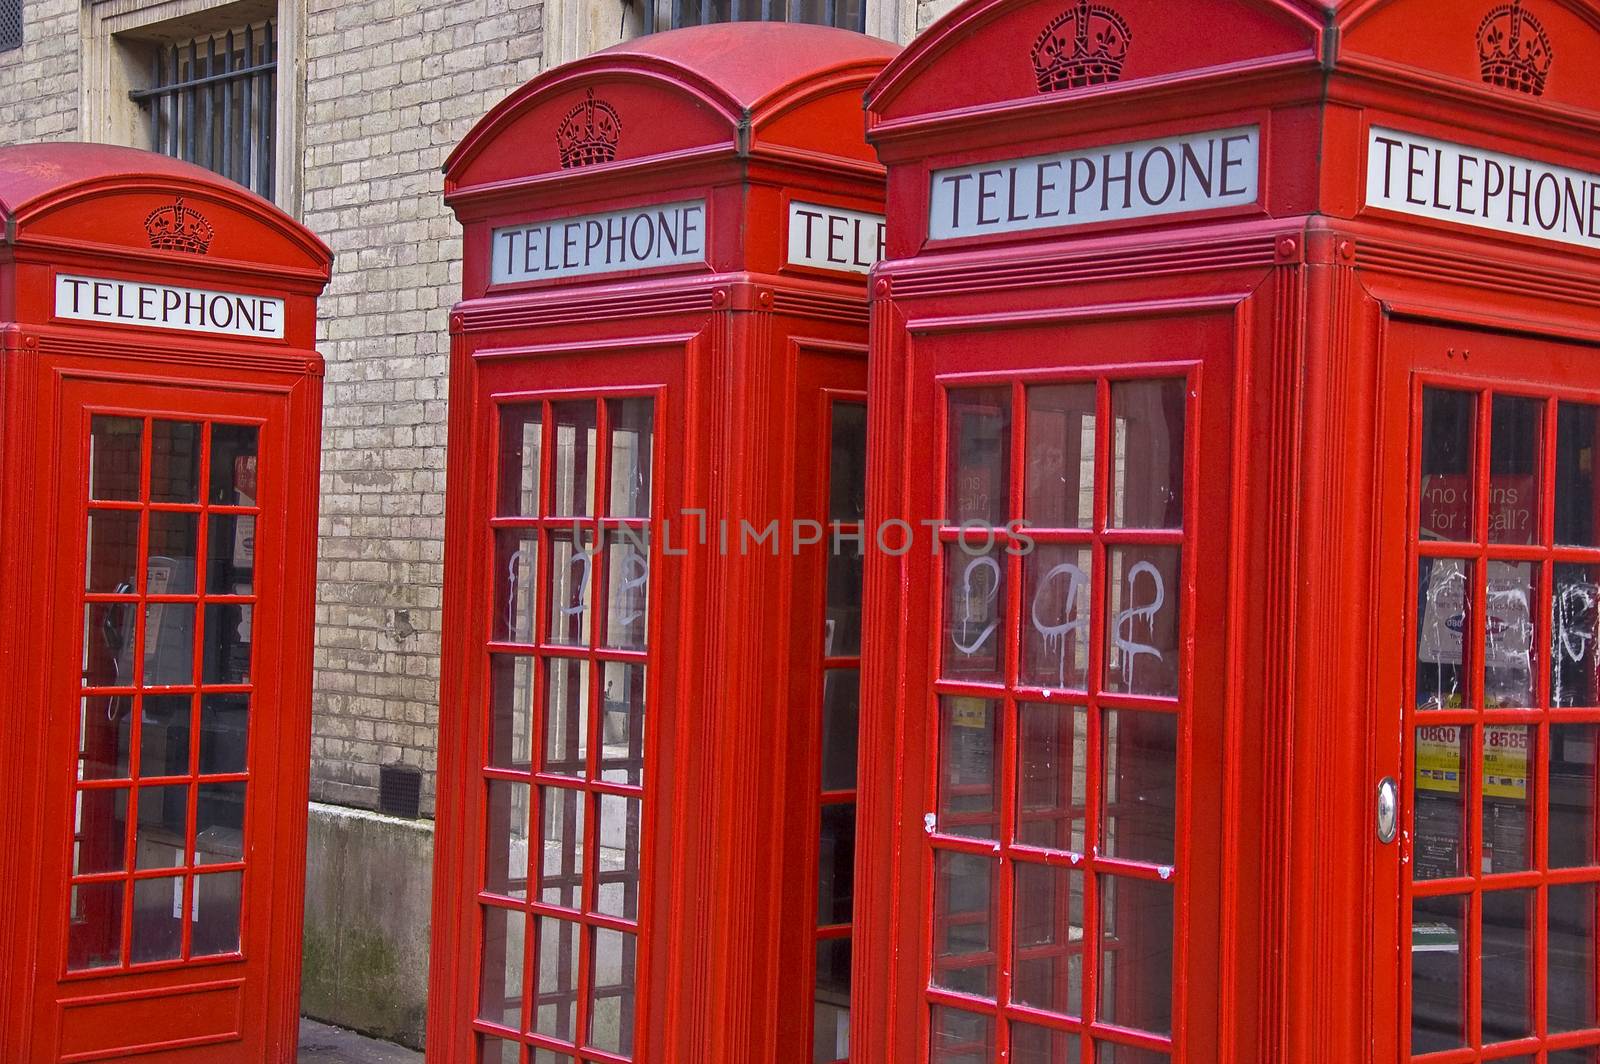 typical British phone boots in a street in London, UK